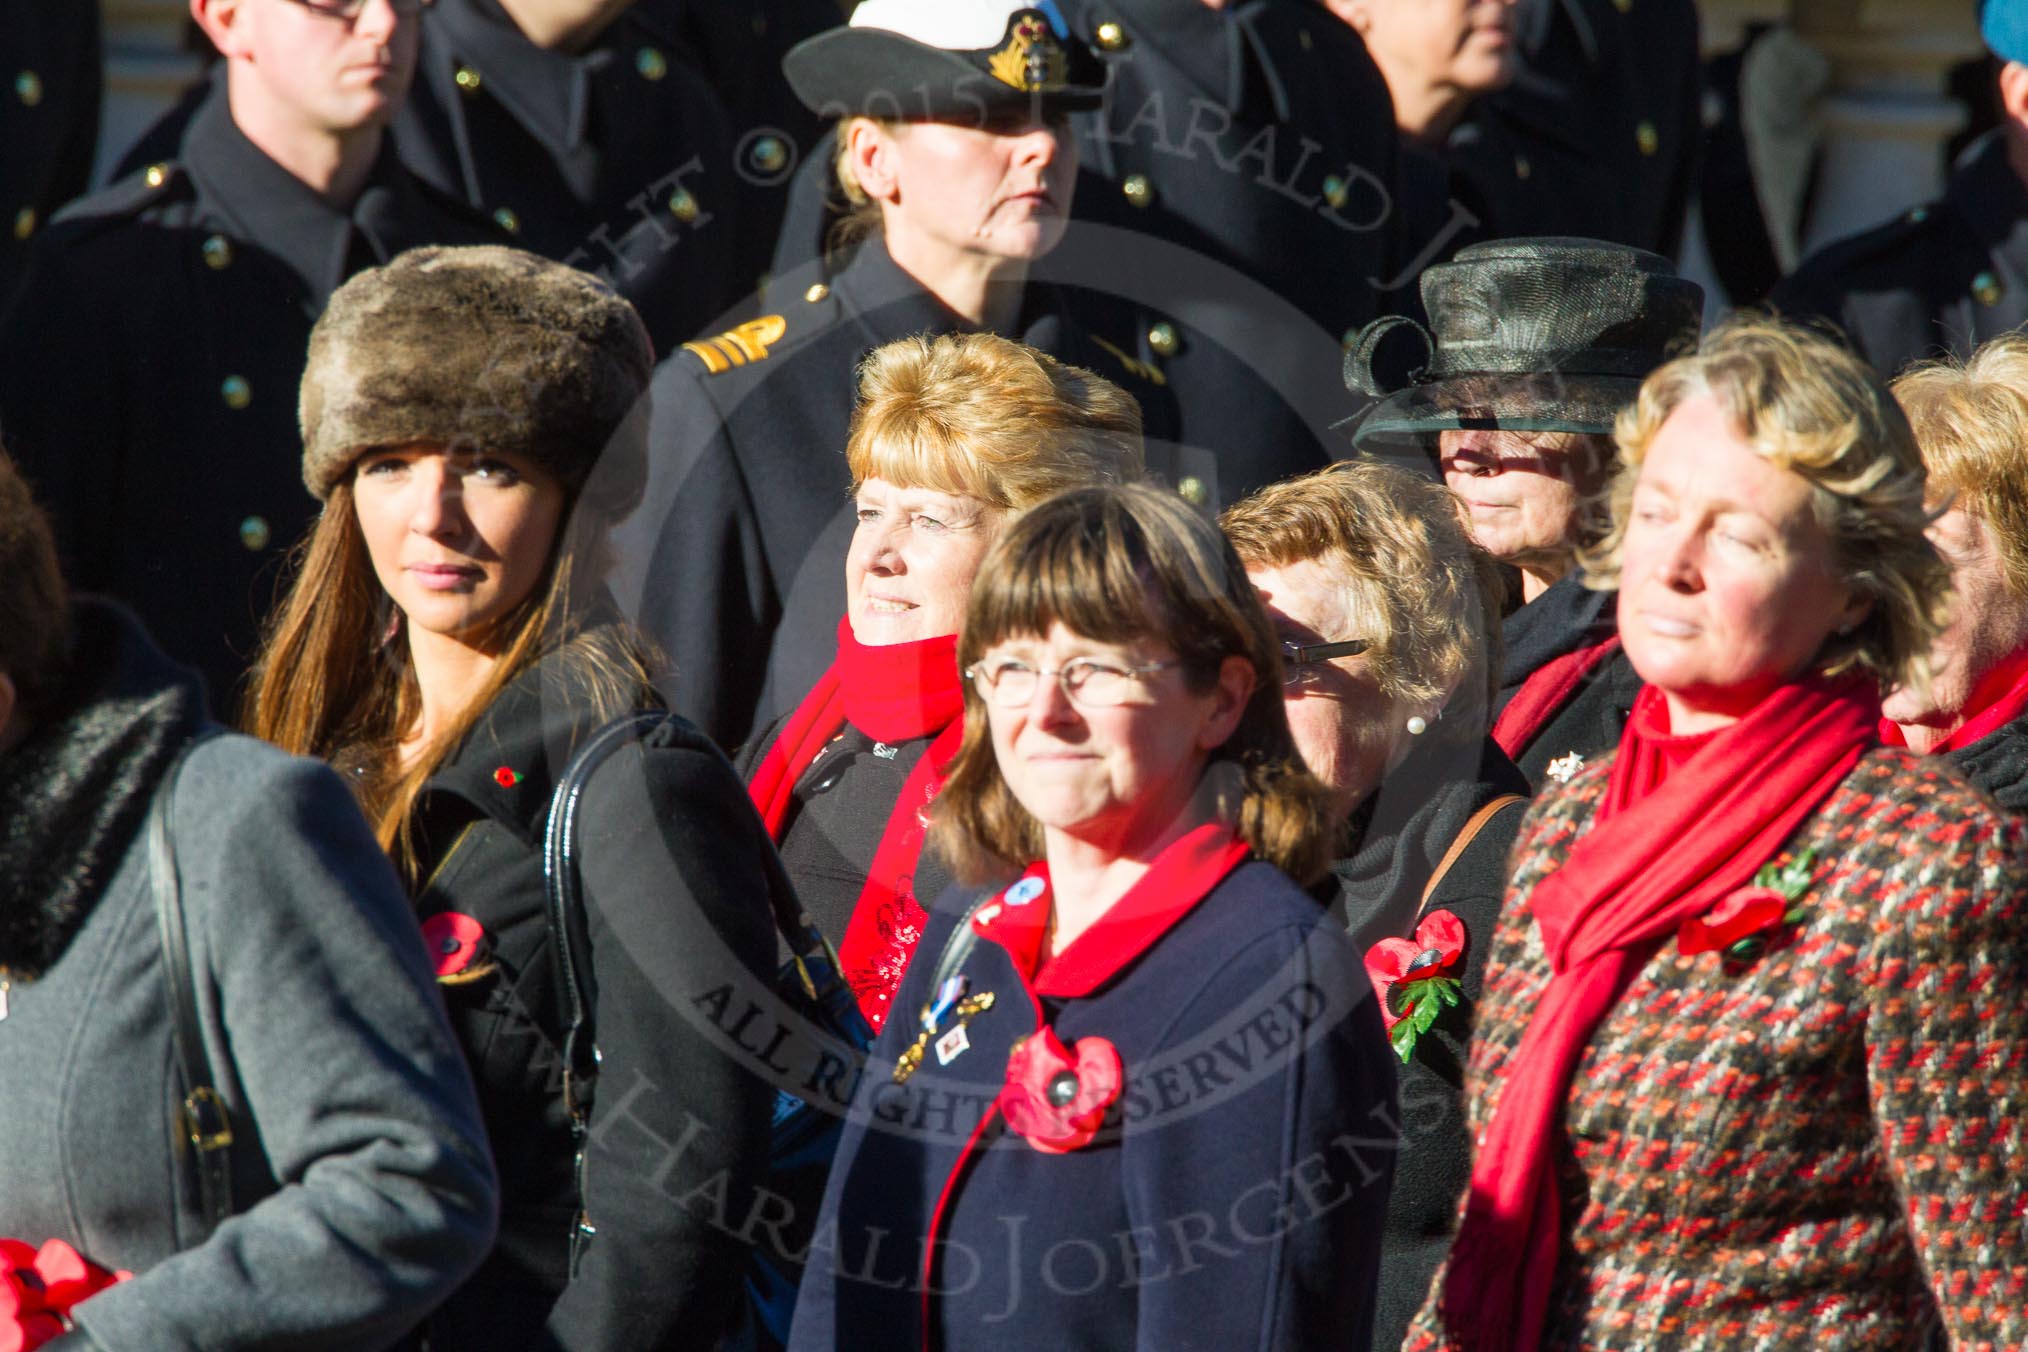 Remembrance Sunday Cenotaph March Past 2013: D1 - War Widows Association. The War Widows' Association exisits to improve the conditions of all War Widow/ers in the United Kingdom. The Association formed in 1971 following an article in a Sunday newspaper that highlighted the plight of Britain’s “forgotten women”. The Association gained charitable status in 1991 and continues to campaign against injustice..
Press stand opposite the Foreign Office building, Whitehall, London SW1,
London,
Greater London,
United Kingdom,
on 10 November 2013 at 11:38, image #29